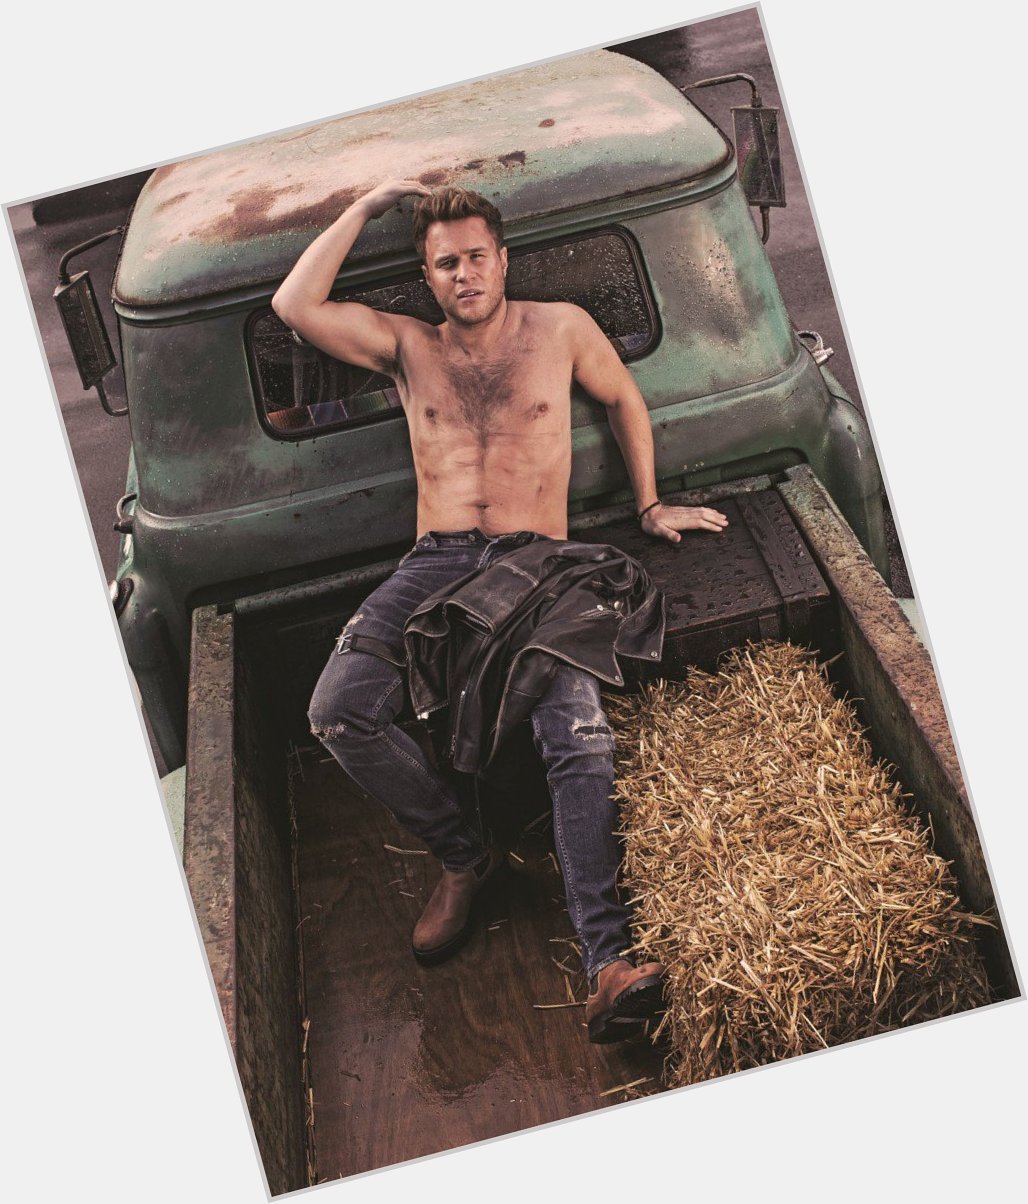 Happy Birthday to the hunky Olly Murs I mean come on. He\s a hunk. To bad its not Monday. 